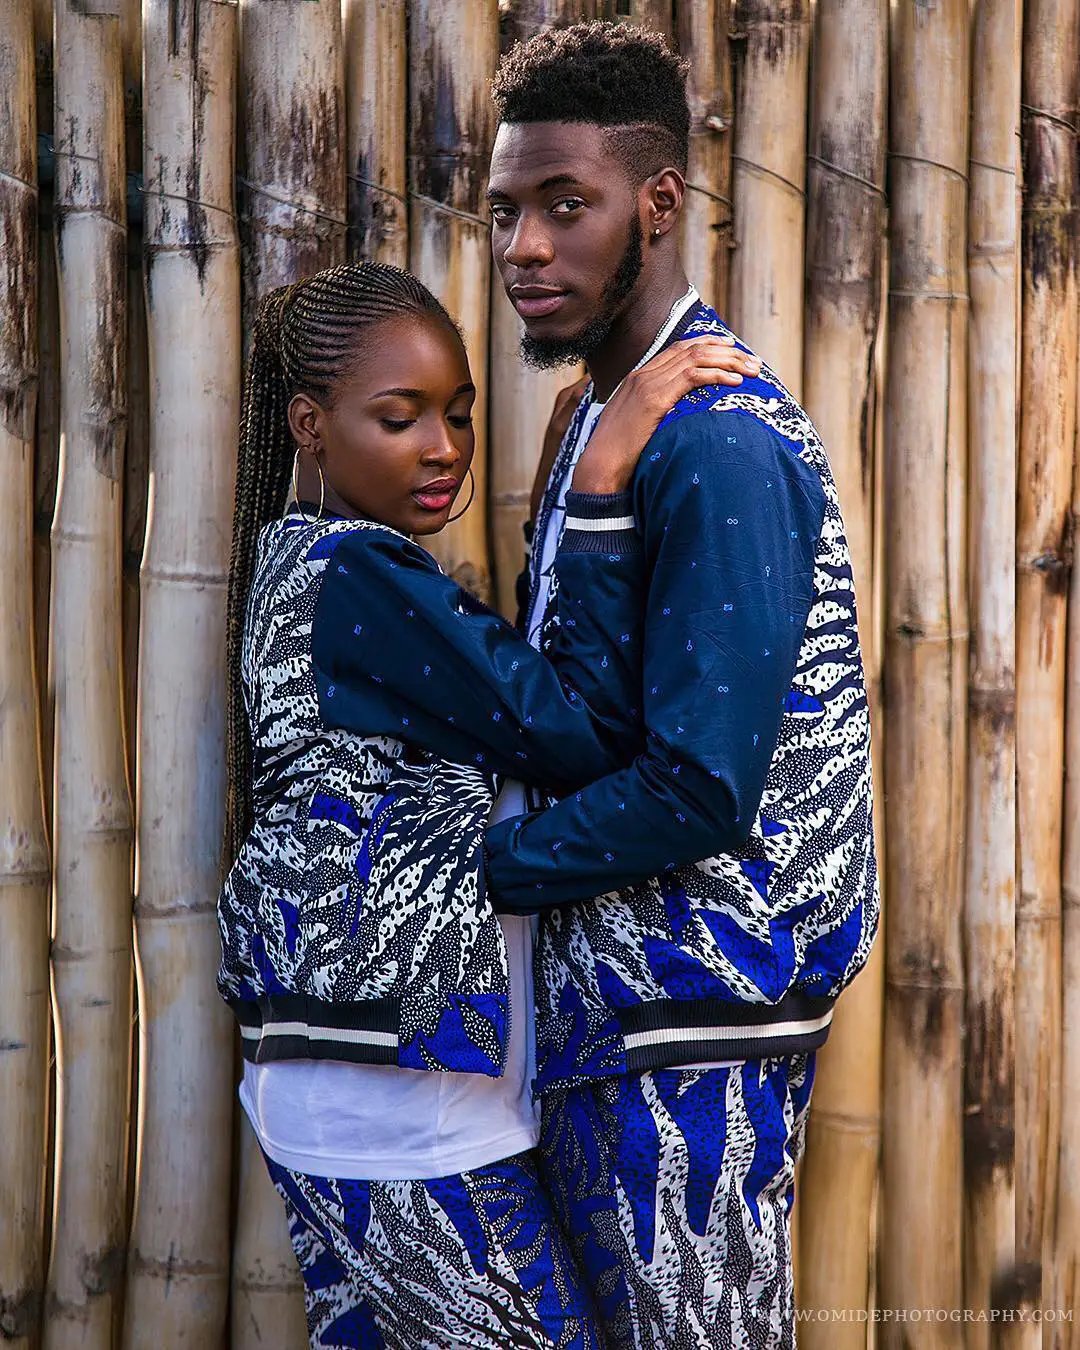  Stylish Couples That Slay Together, Stay Together!